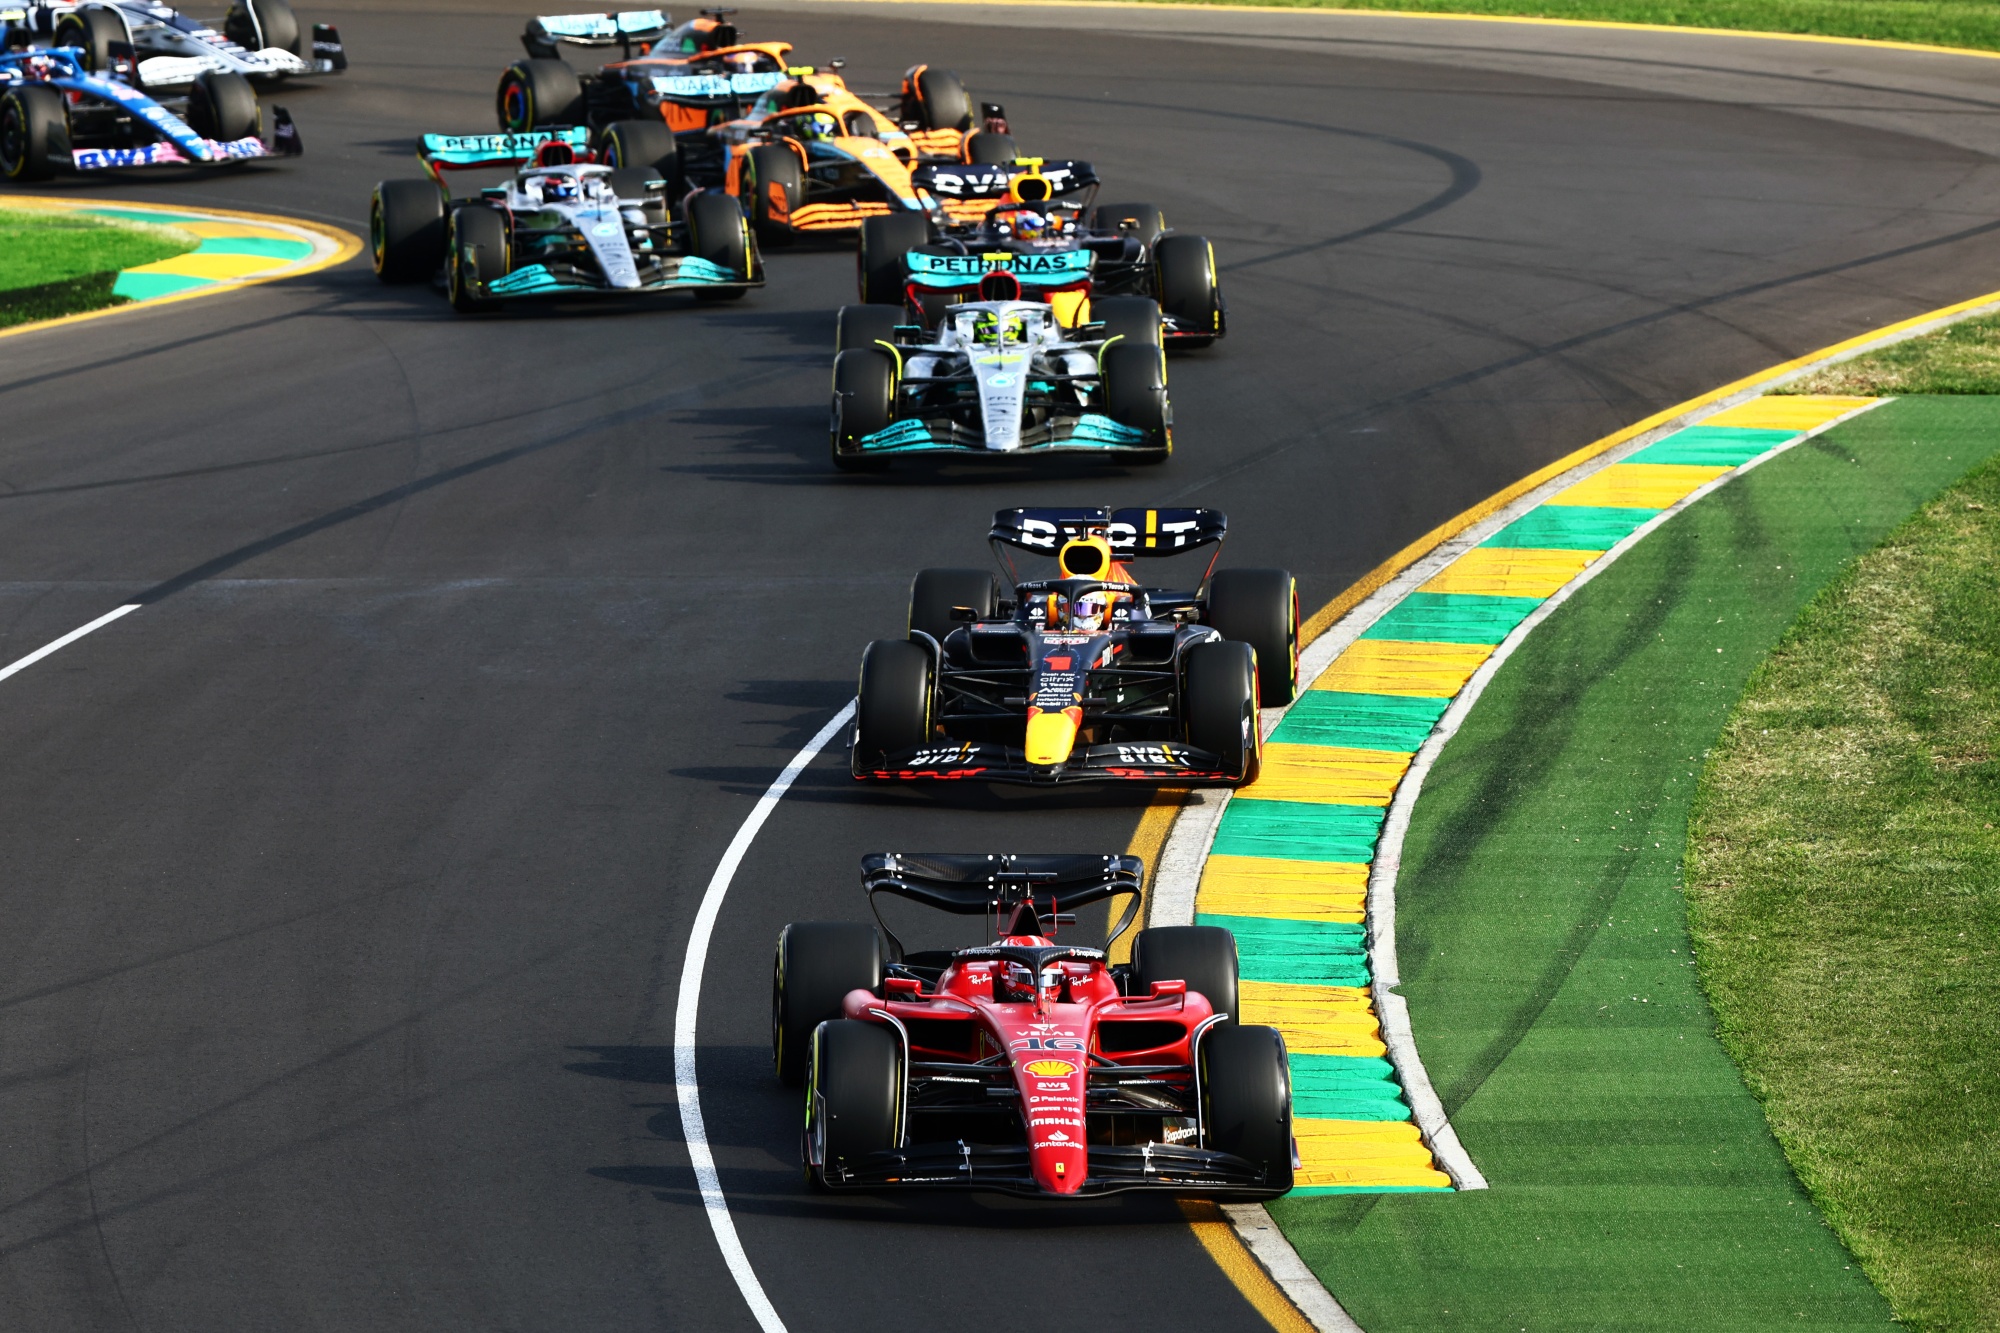 Disney Signs Deal to Renew Formula 1 Broadcast Rights - Bloomberg